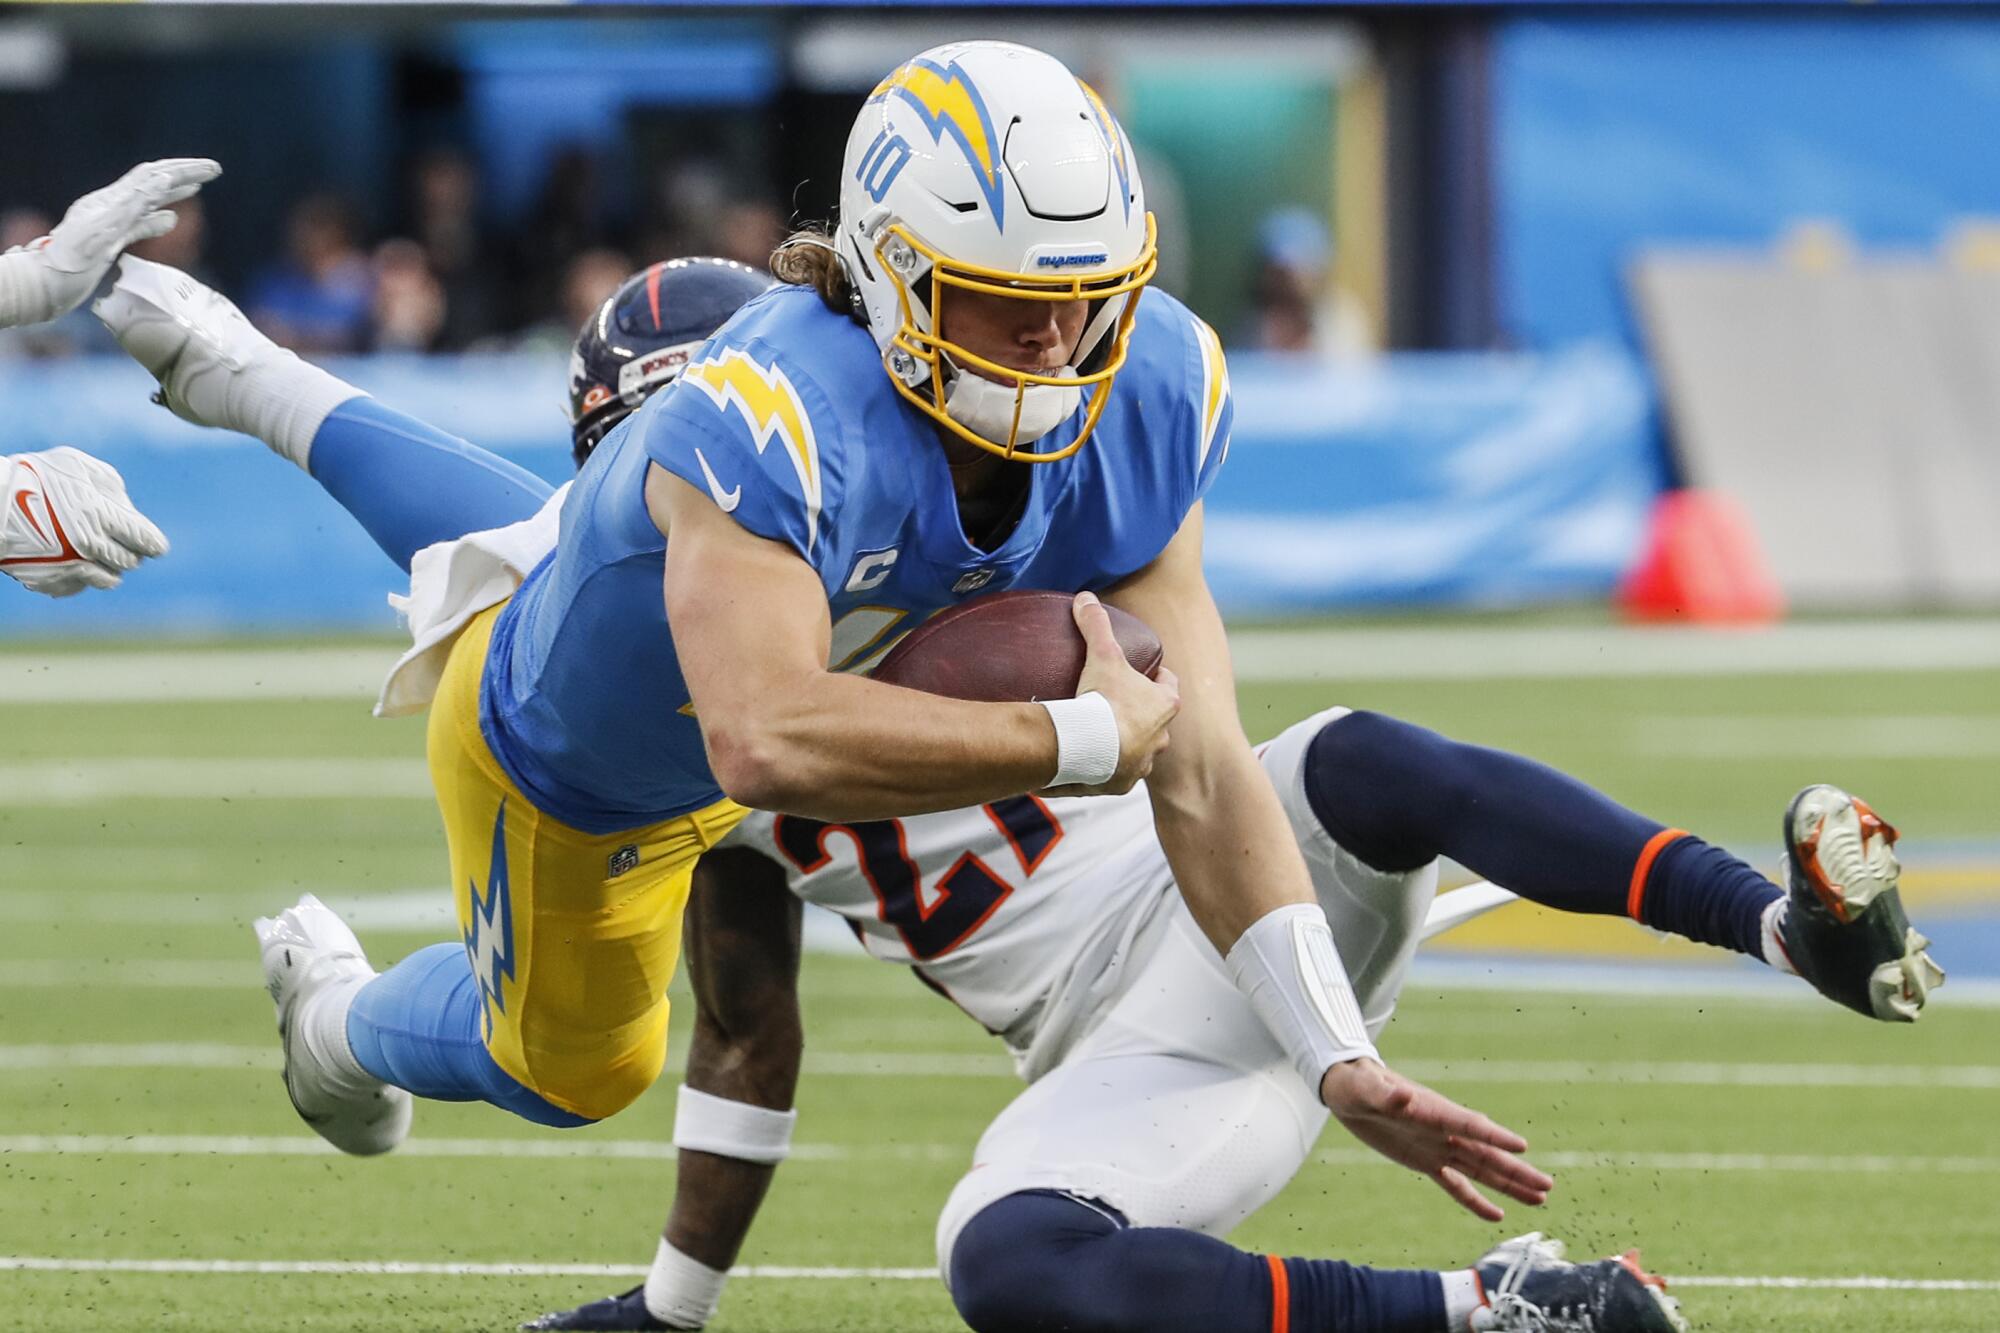 Chargers quarterback Justin Herbert dives for a first down in front of Denver Broncos cornerback Ronald Darby.